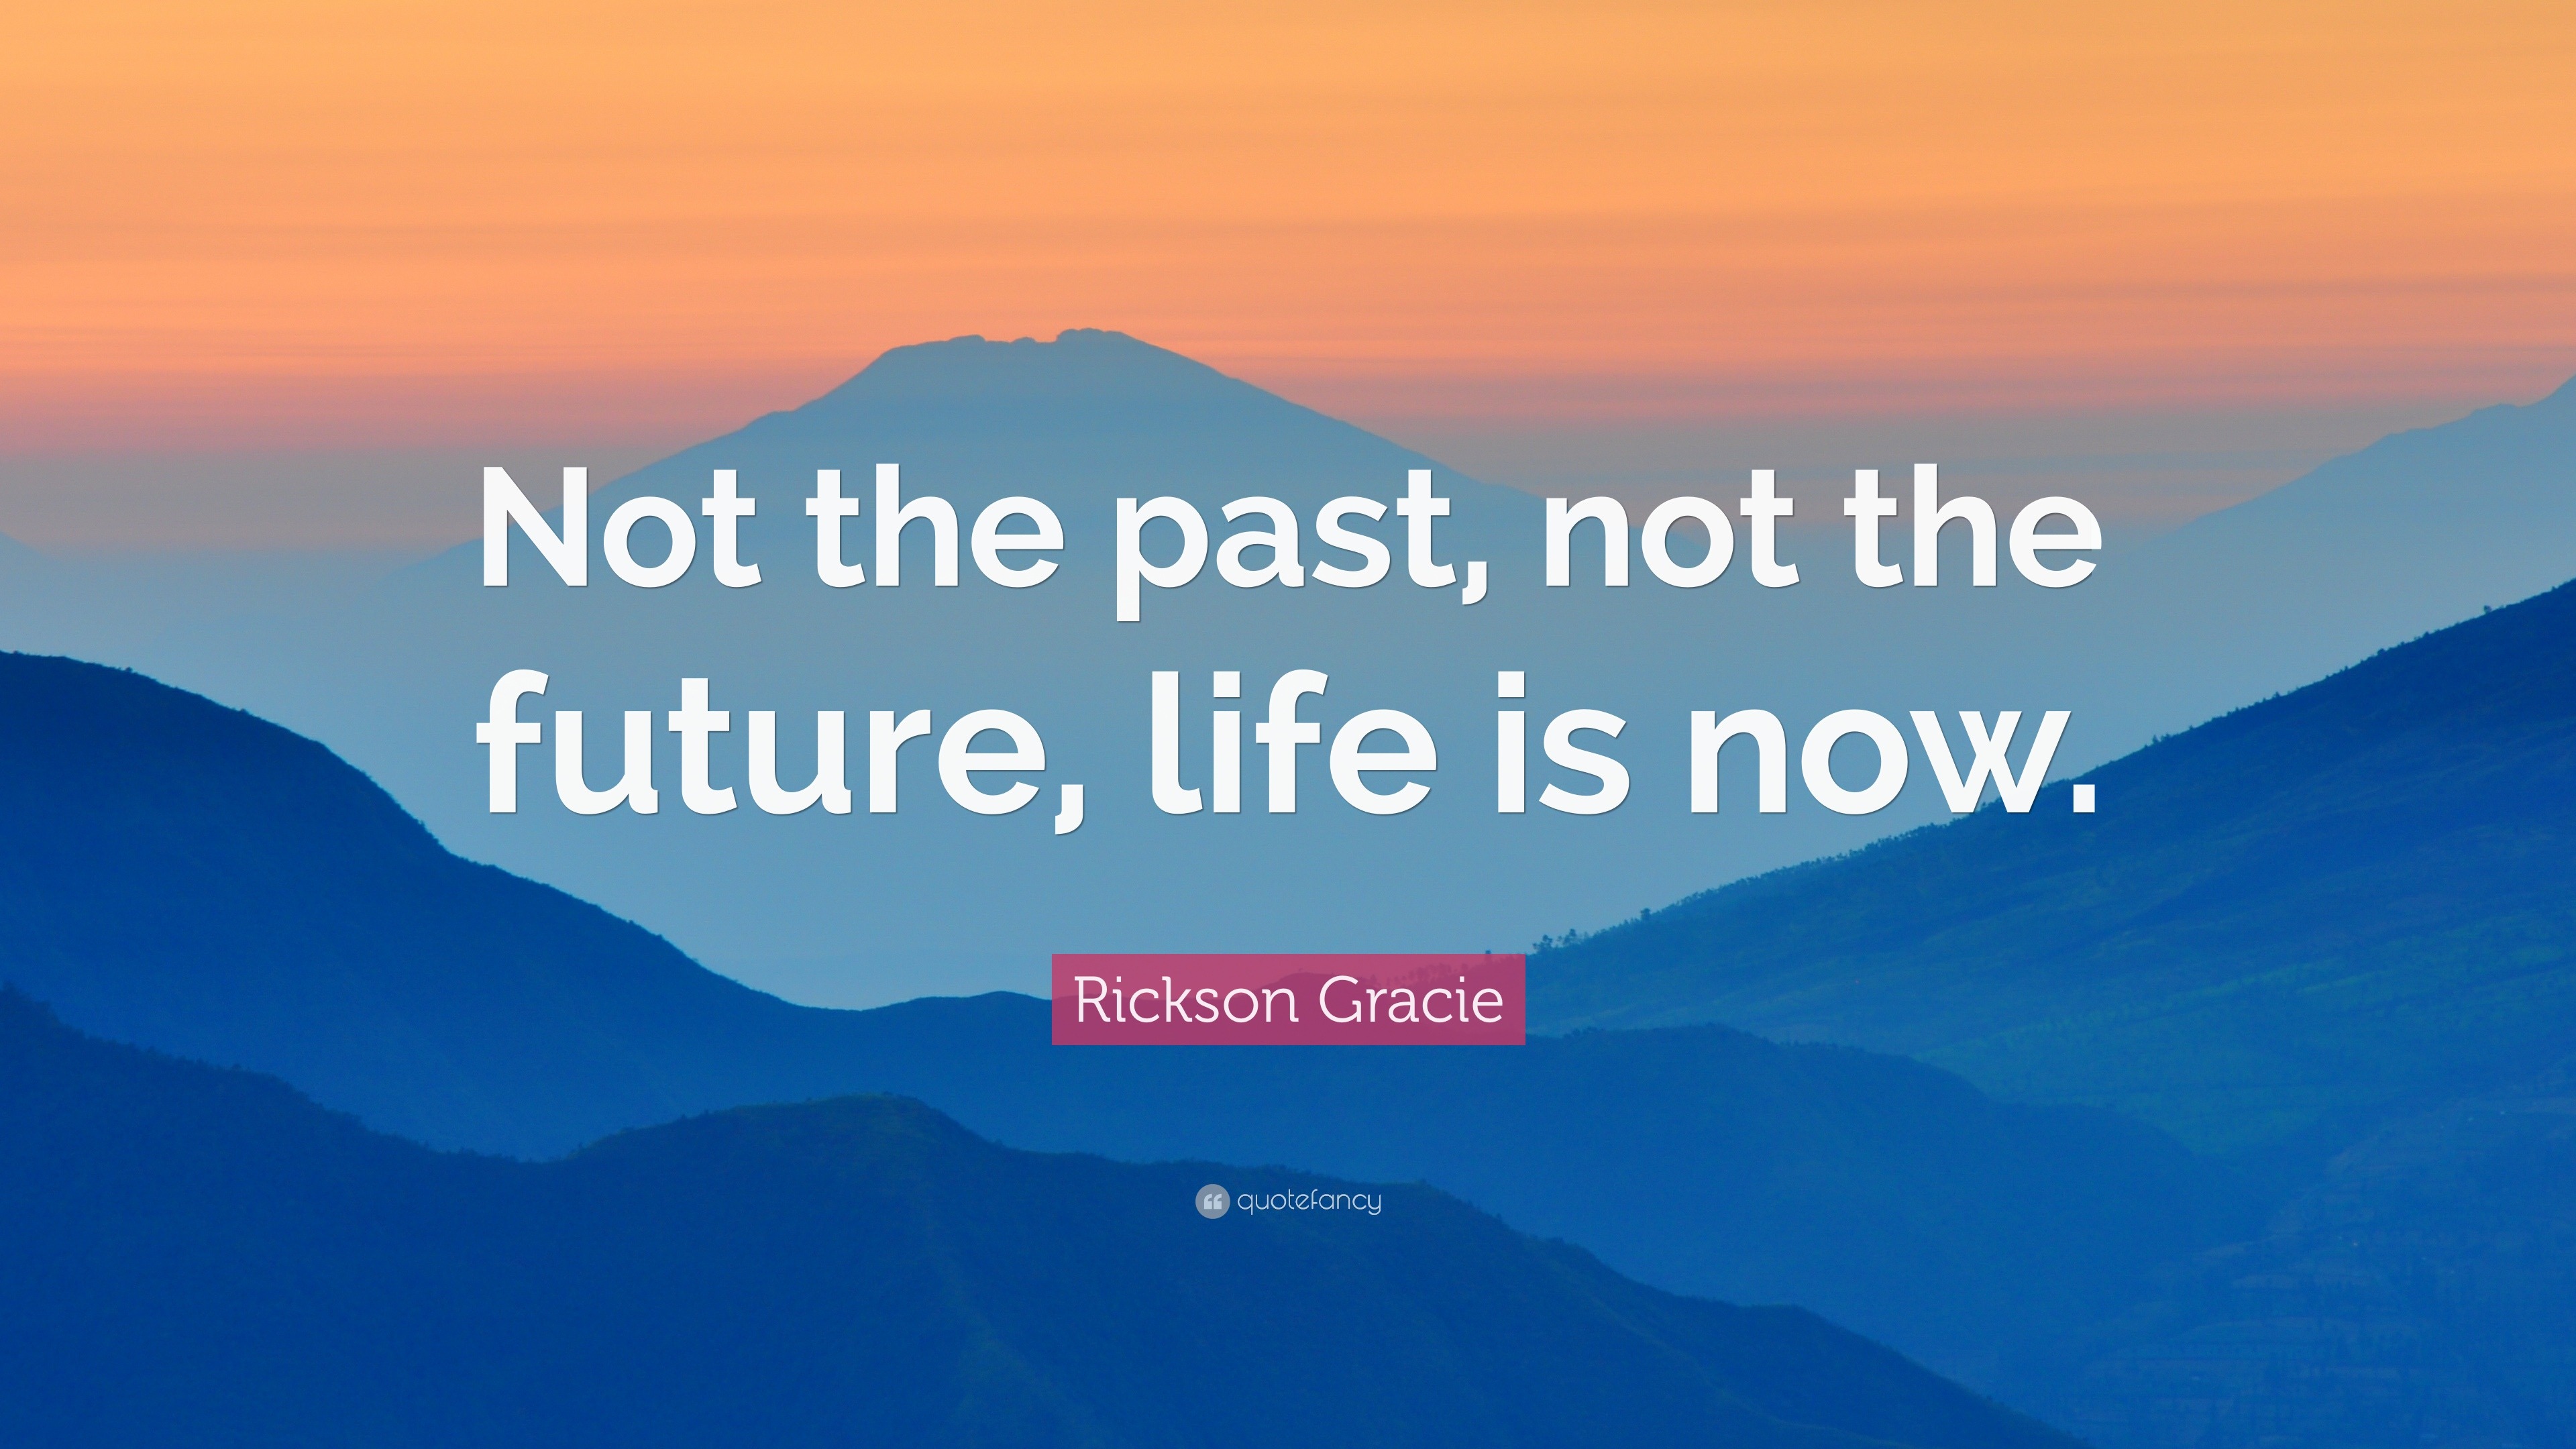 Rickson Gracie Quote: “Not the past, not the future, life is now.”